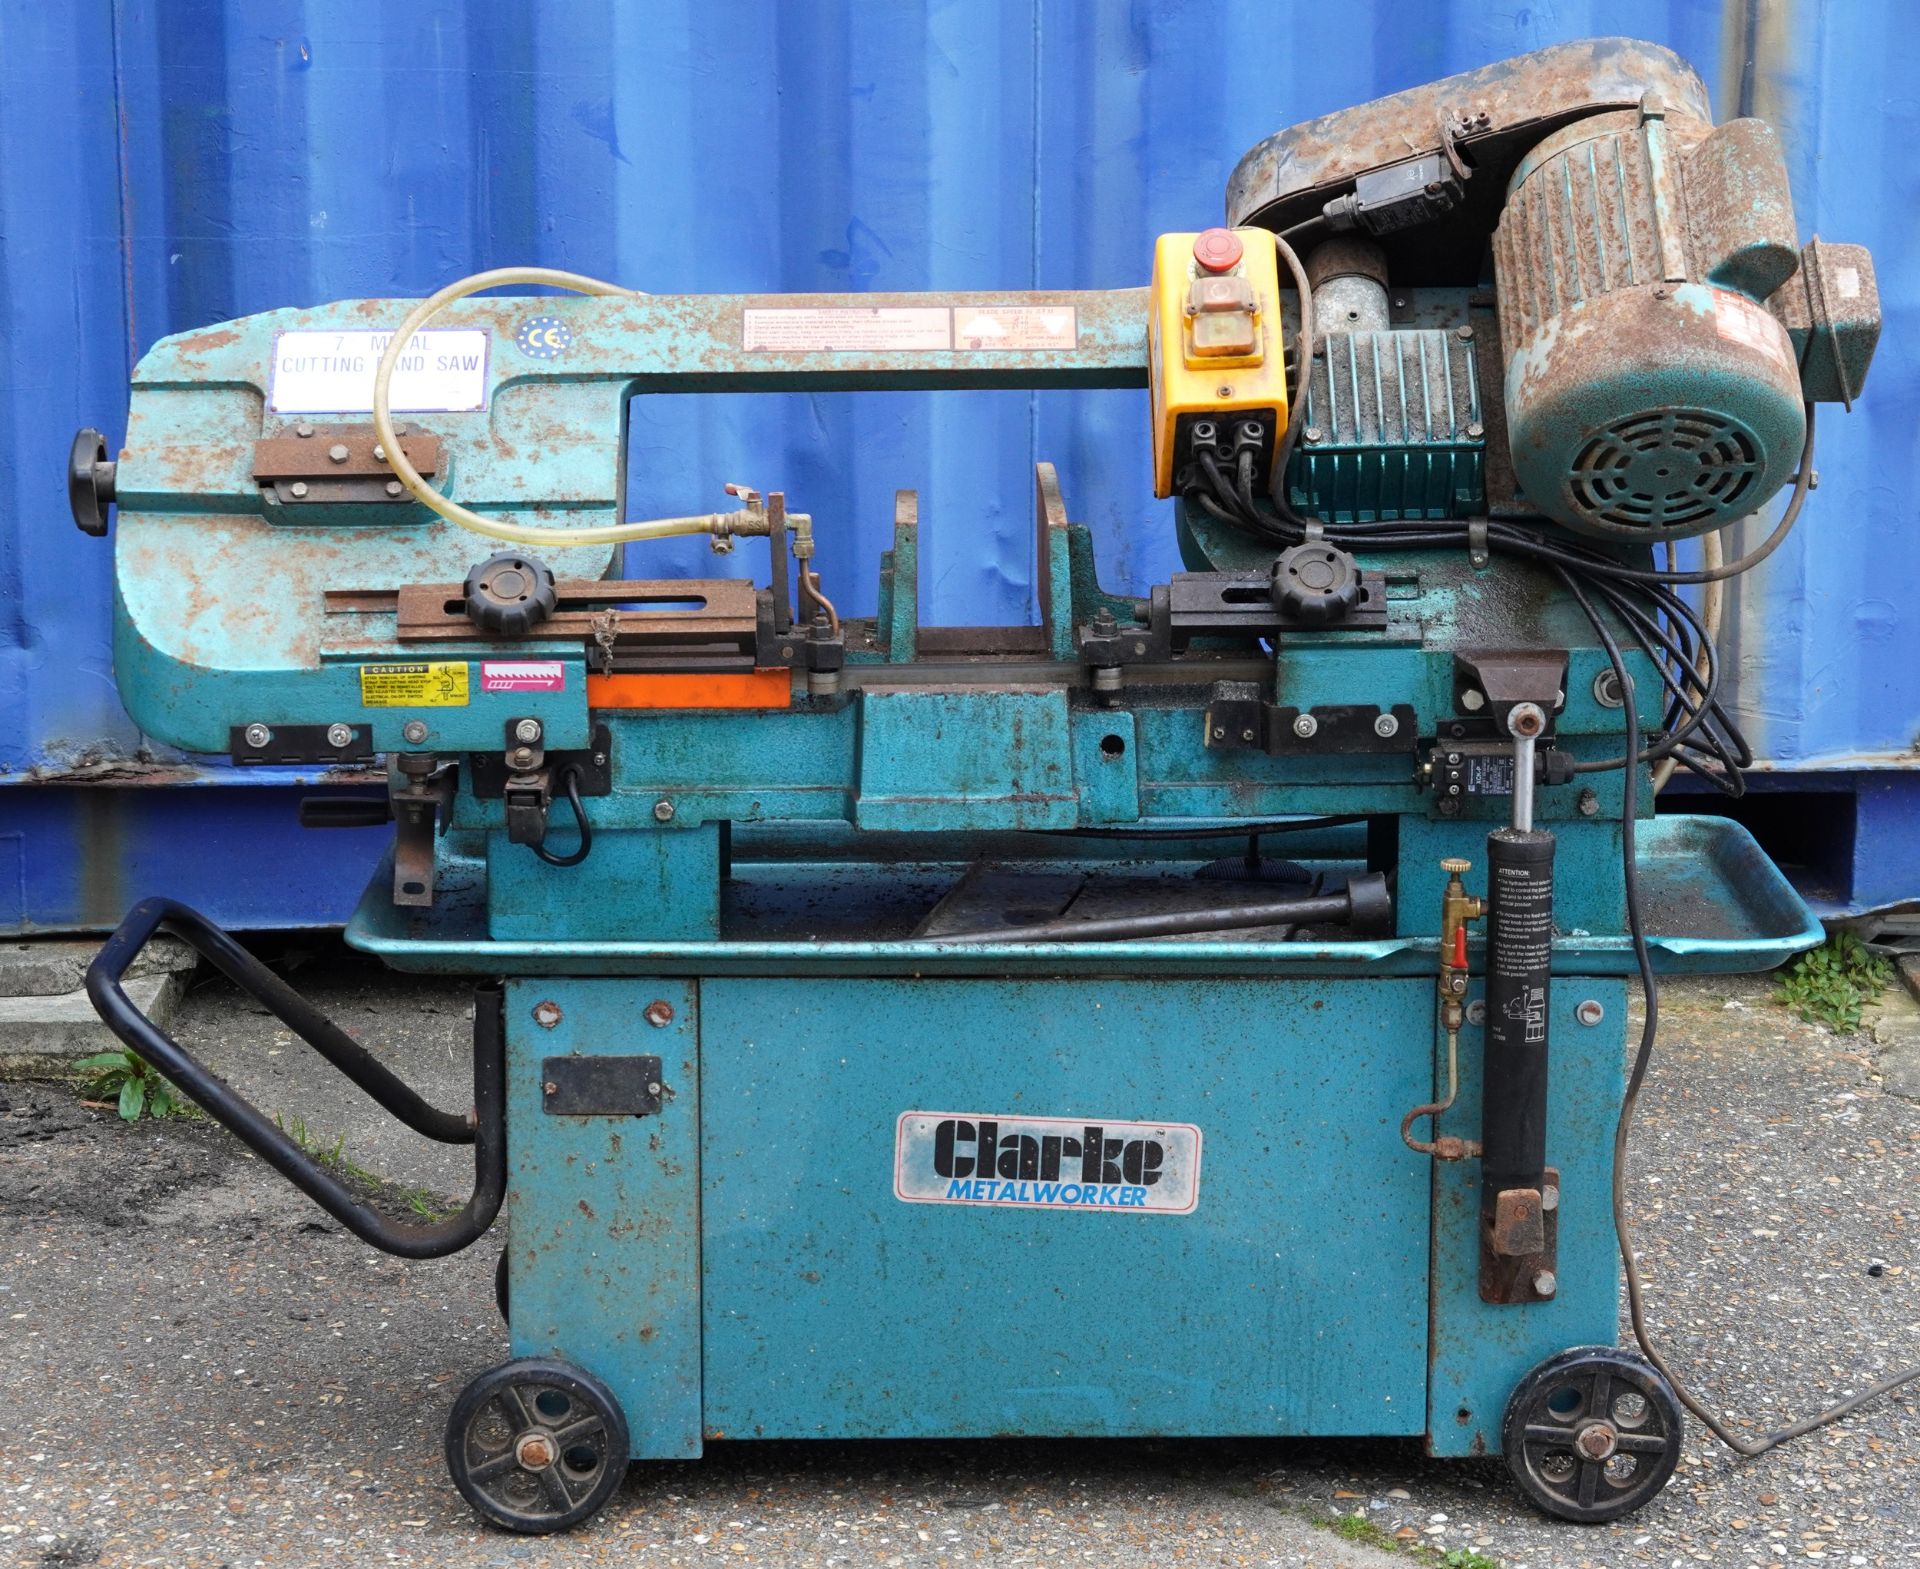 Clarke Seven inch metal cutting bandsaw, model CBS-7MH, serial number 9028160, 120cm wide